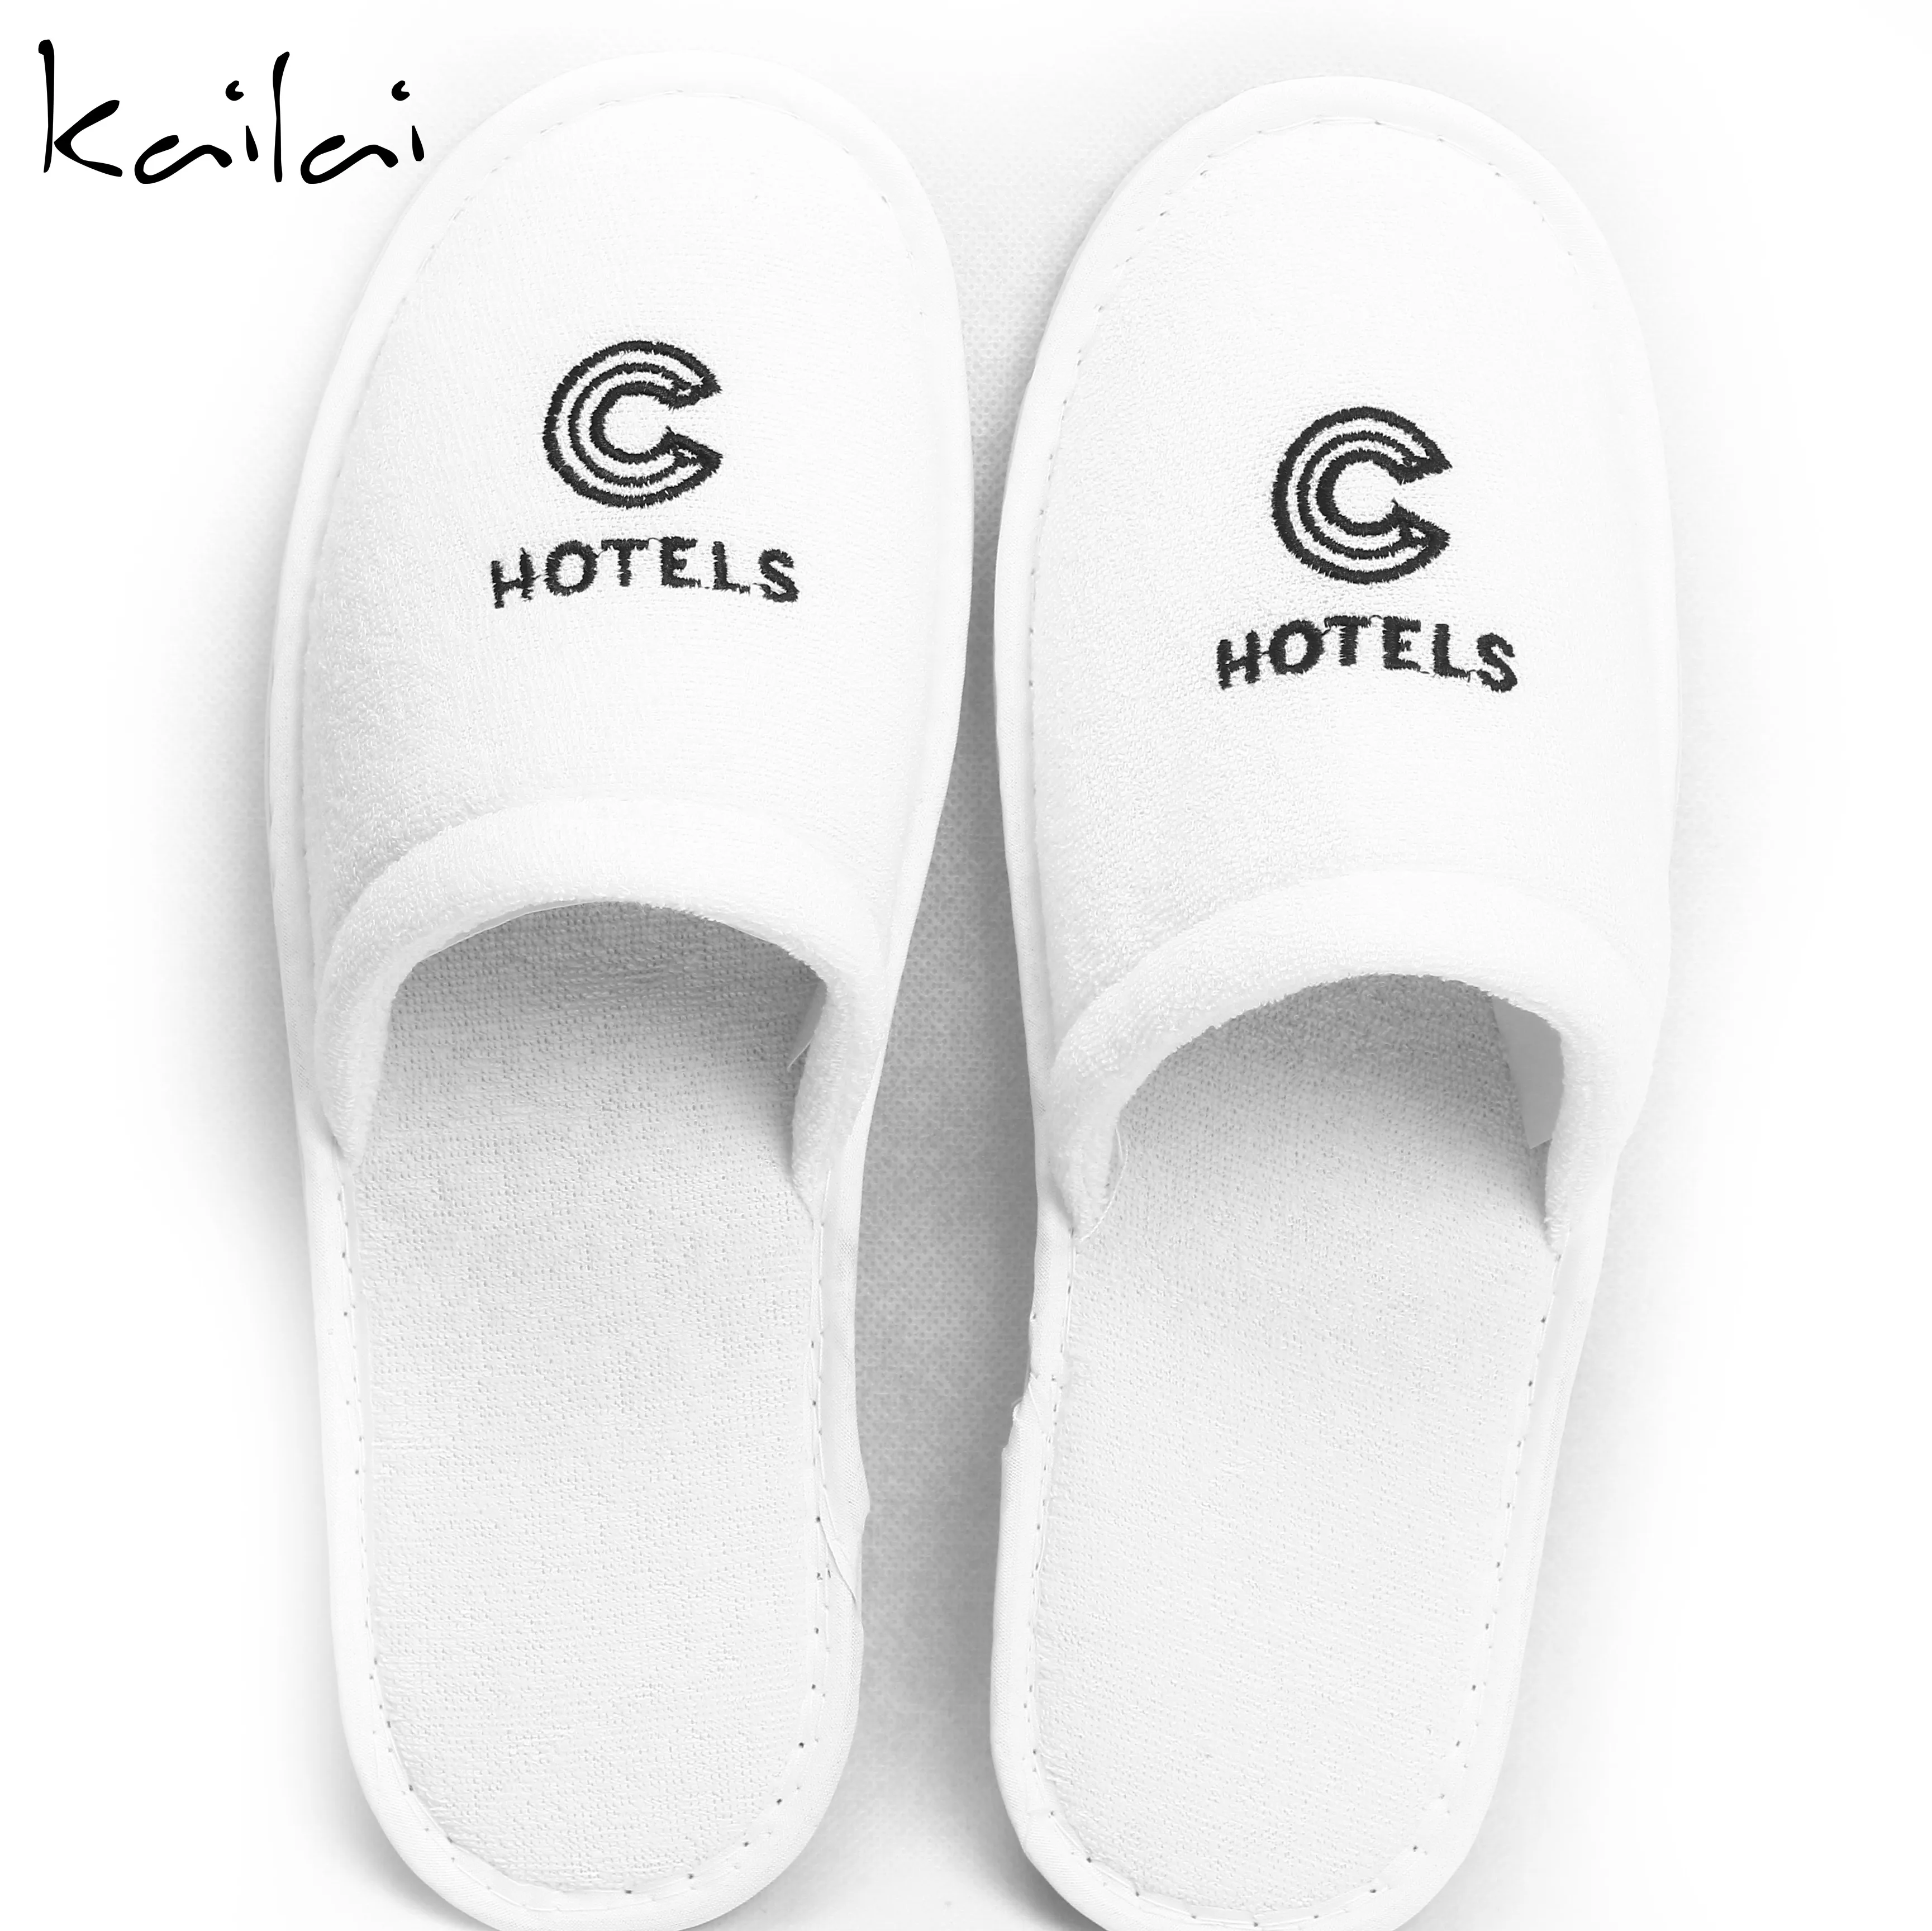 High Quality Hotel Amenities Of Disposable Hotel Slippers - Buy Hotel ...